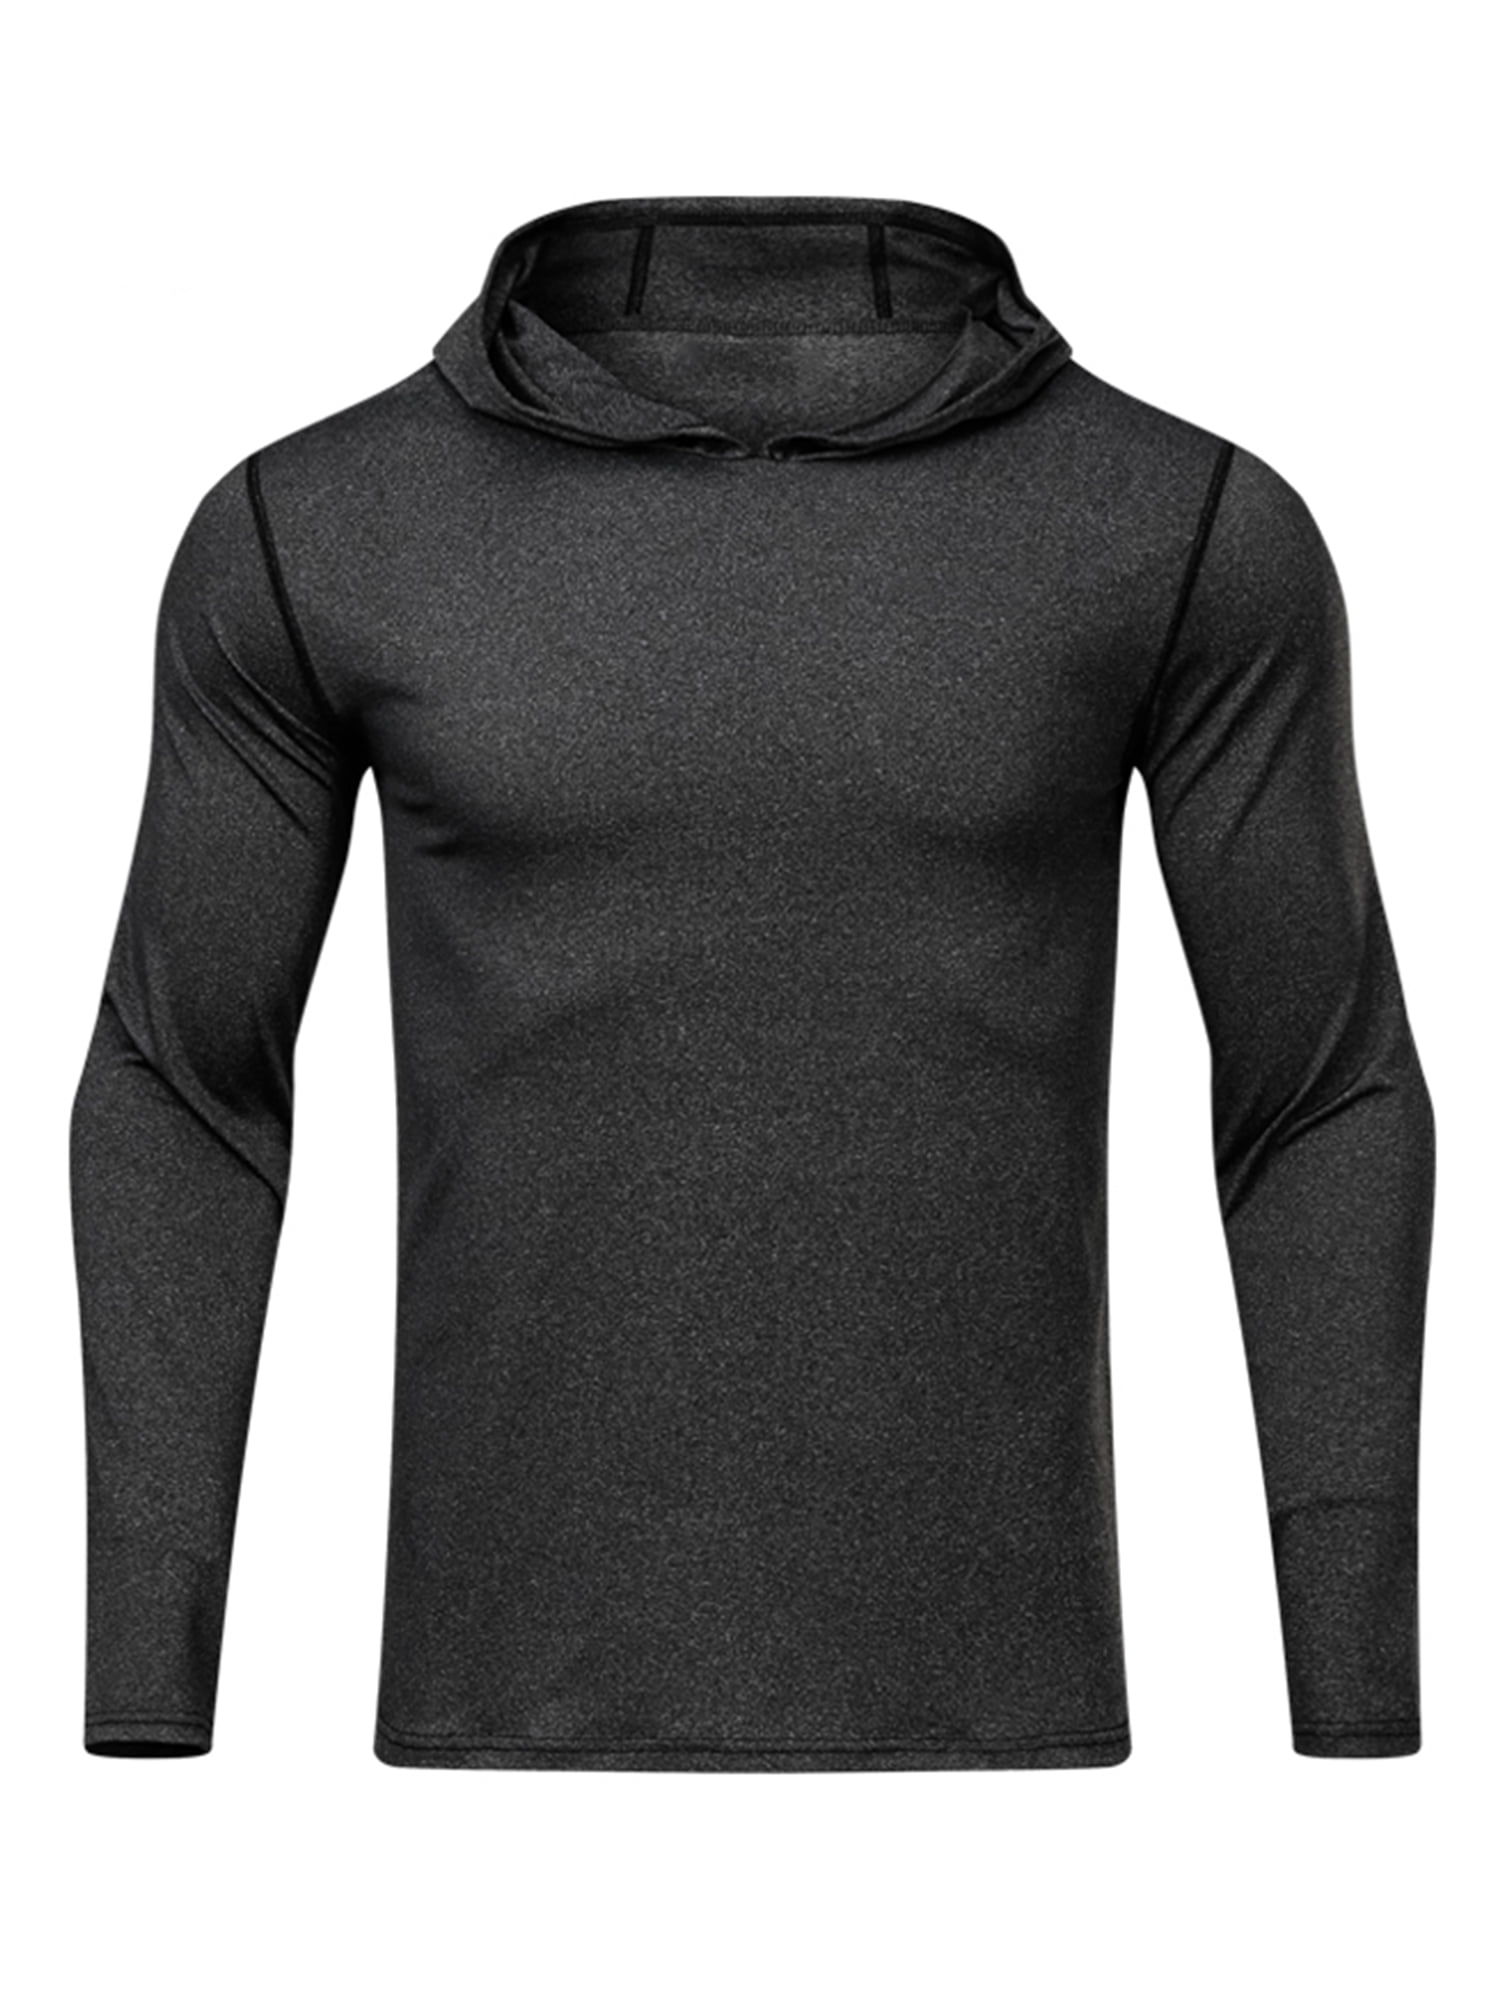 Cool Breathable Active Stretch Fitness Hoodie Running Training Sports Hooded Top 